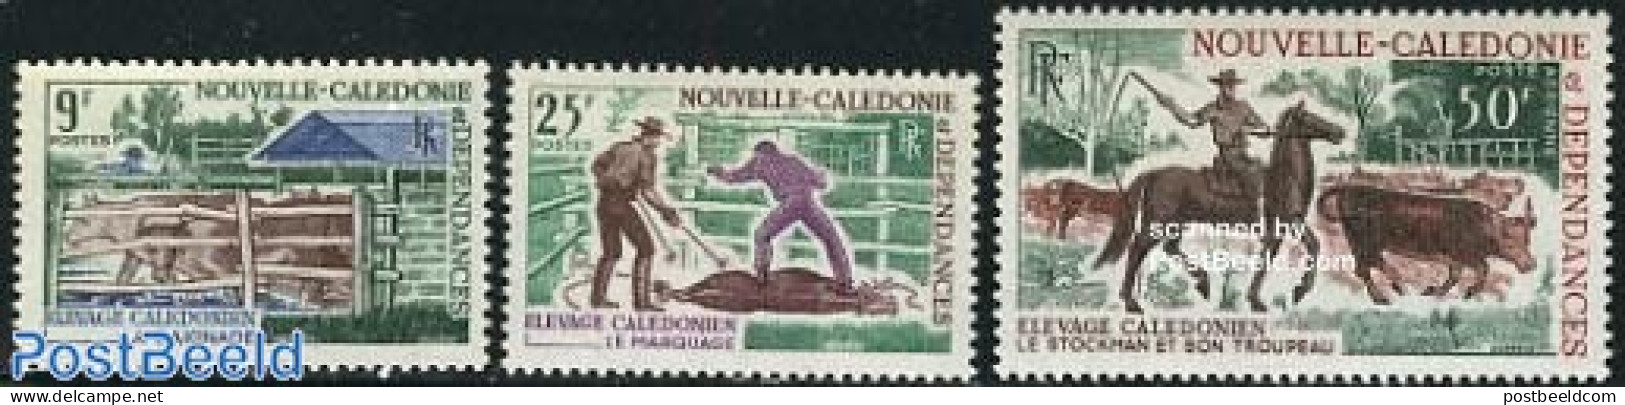 New Caledonia 1969 Cattle 3v, Mint NH, Nature - Cattle - Horses - Unused Stamps